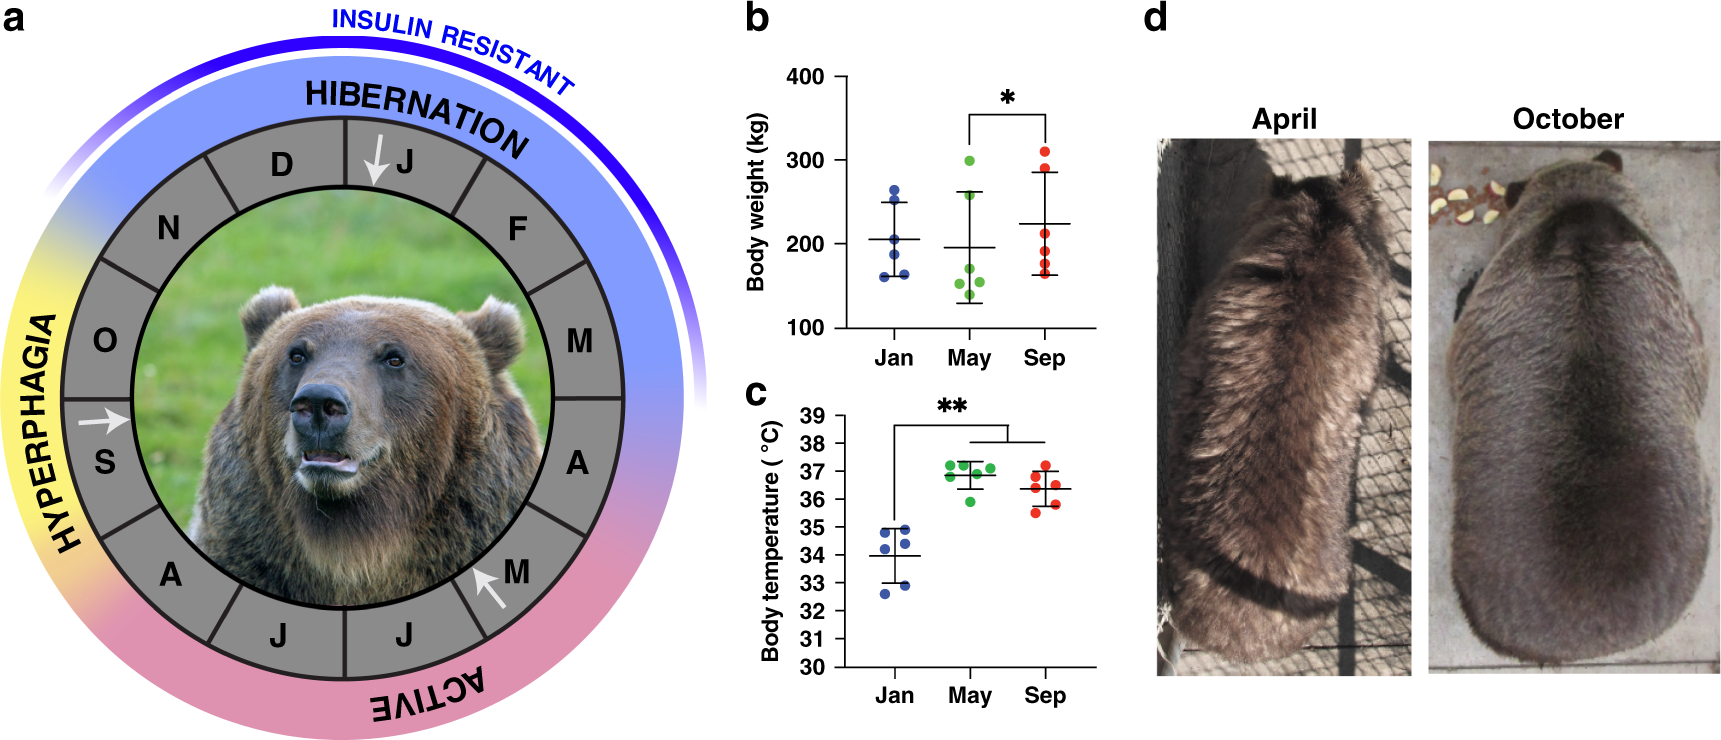 Hibernation induces widespread transcriptional remodeling in metabolic  tissues of the grizzly bear | Communications Biology